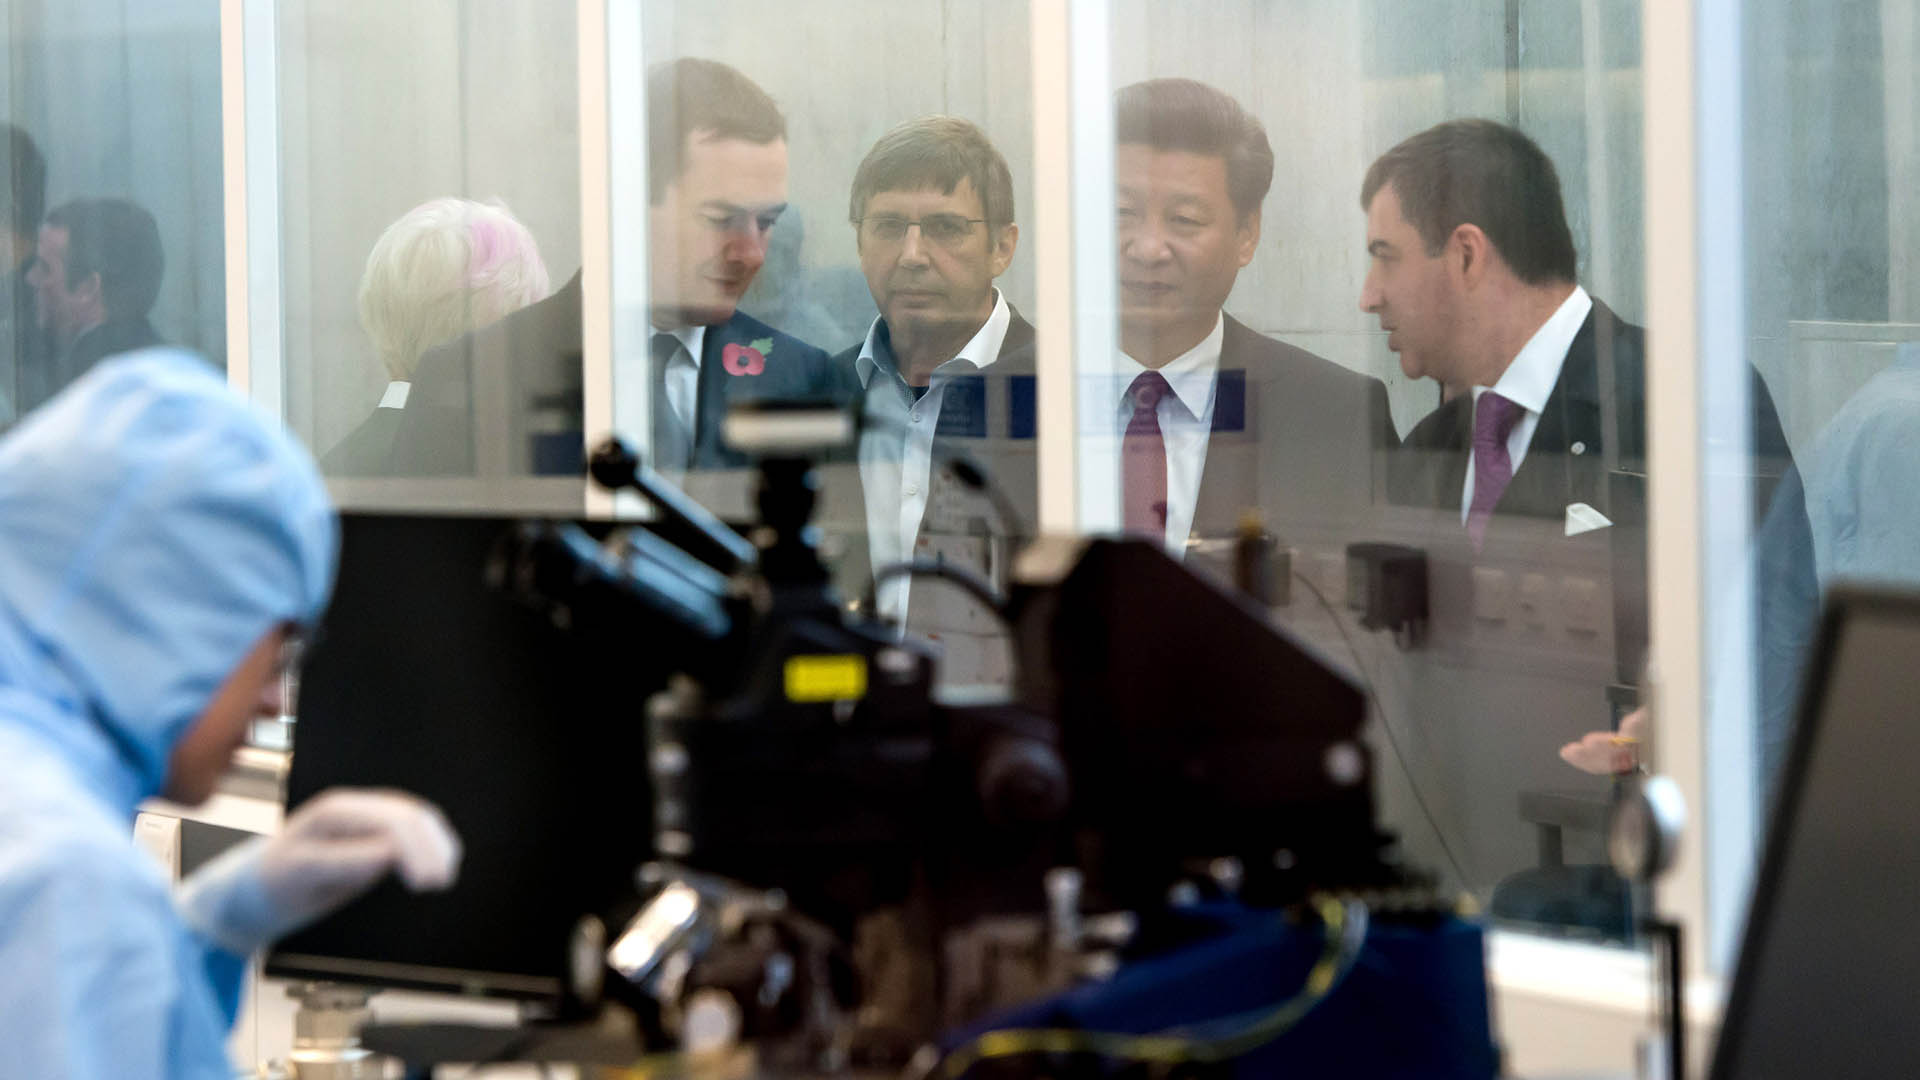 Then Chancellor of the Exchequer George Osborne (L) and Chinese President Xi Jinping tour the University of Manchester's National Graphene Institute on October 23, 2015 in Manchester, England.  (Richard Stonehouse - WPA Pool / Getty Images)